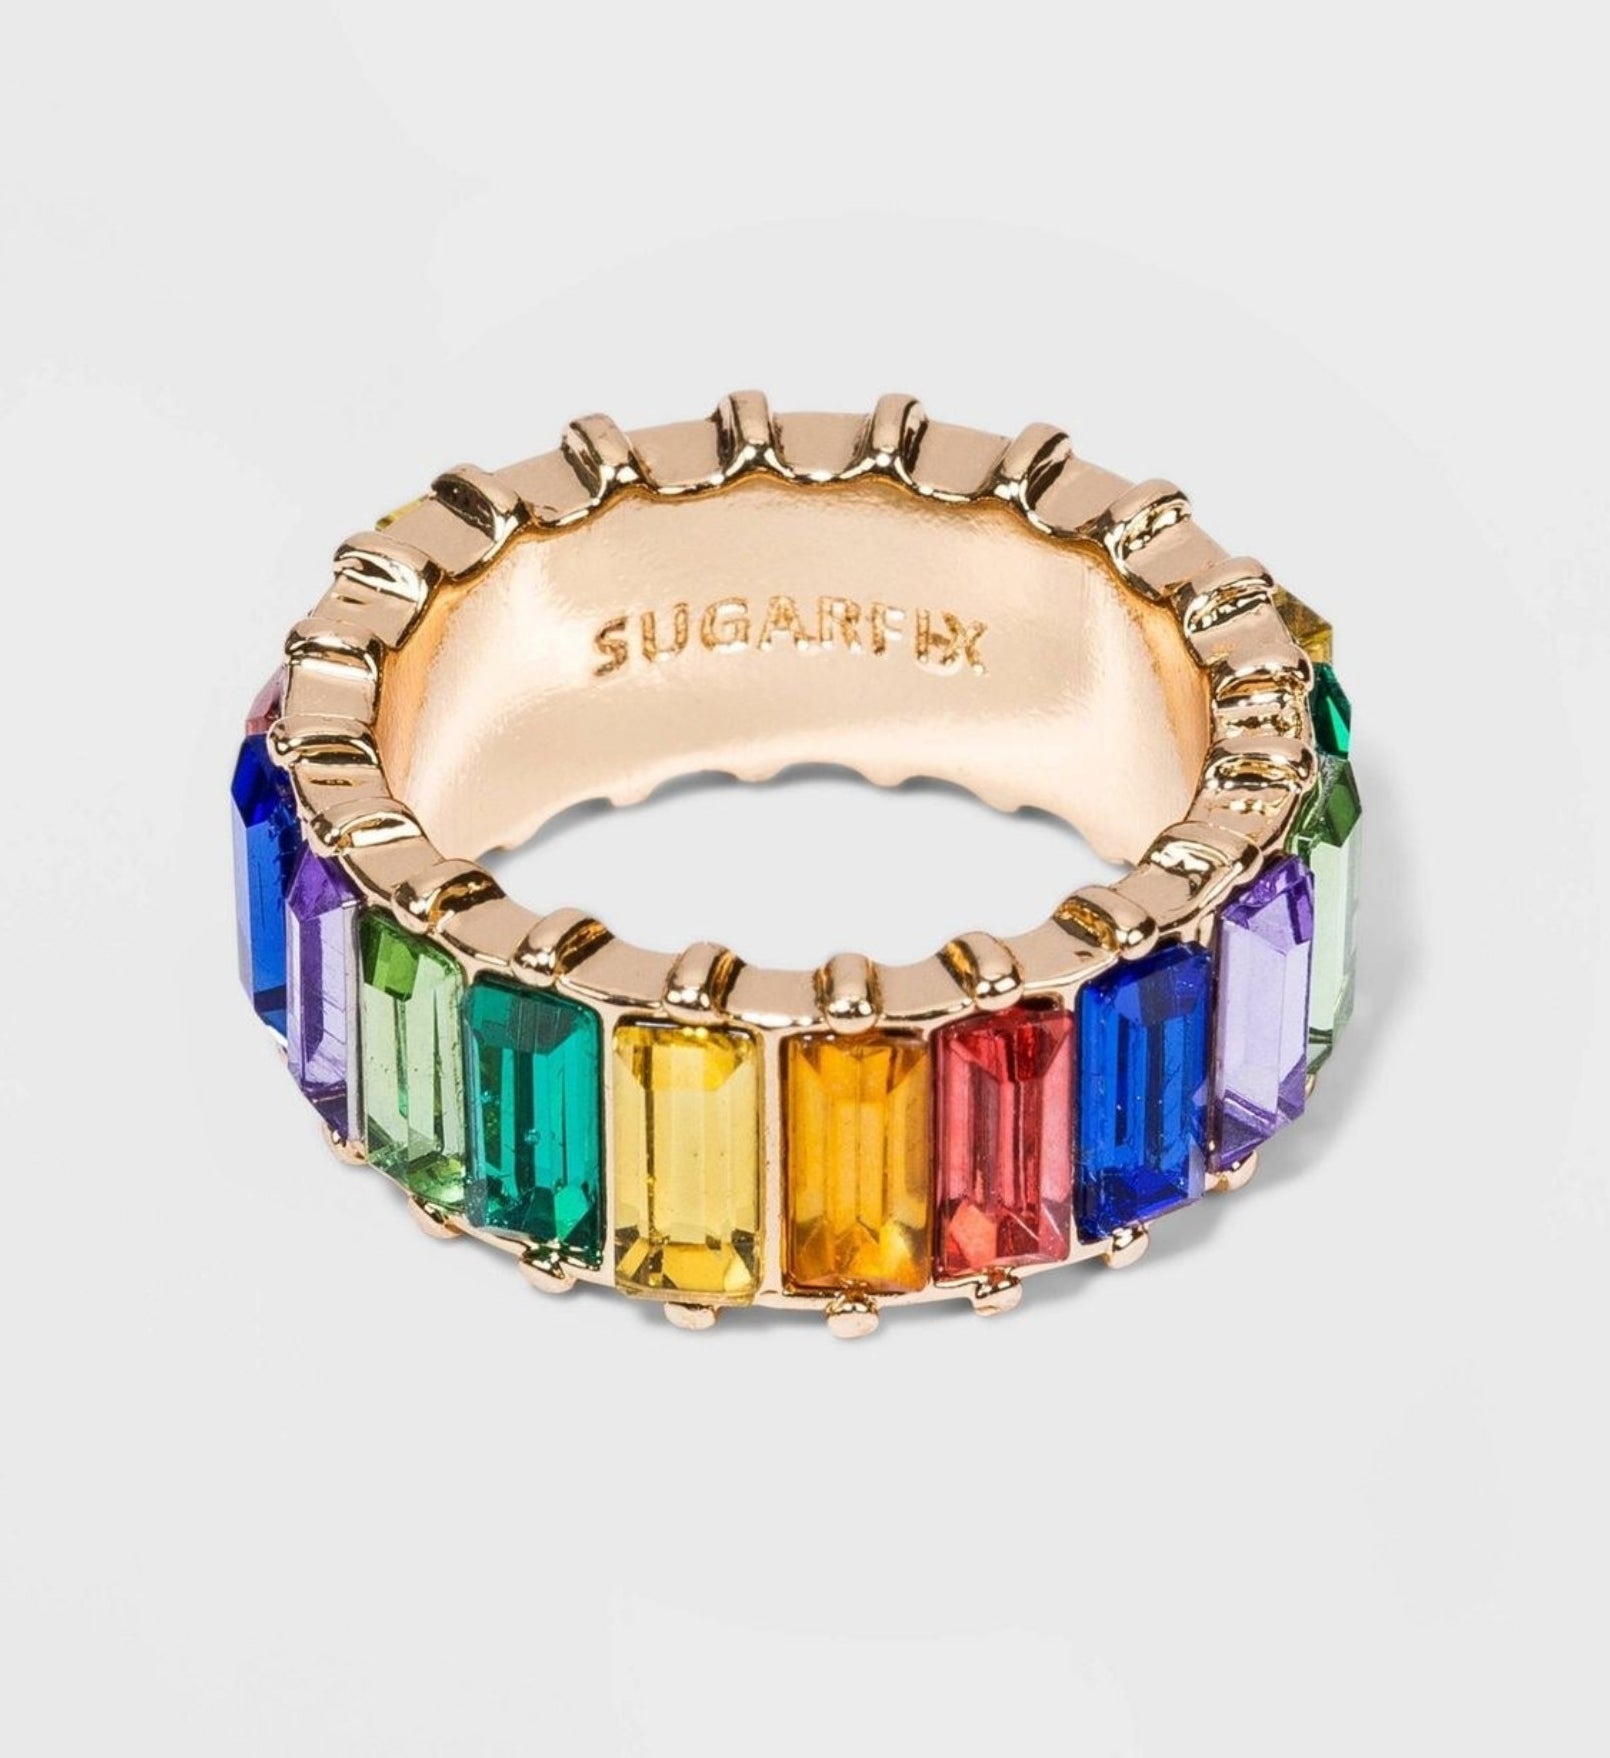 Ring with rectangular crystals in rainbow colors around the whole thing